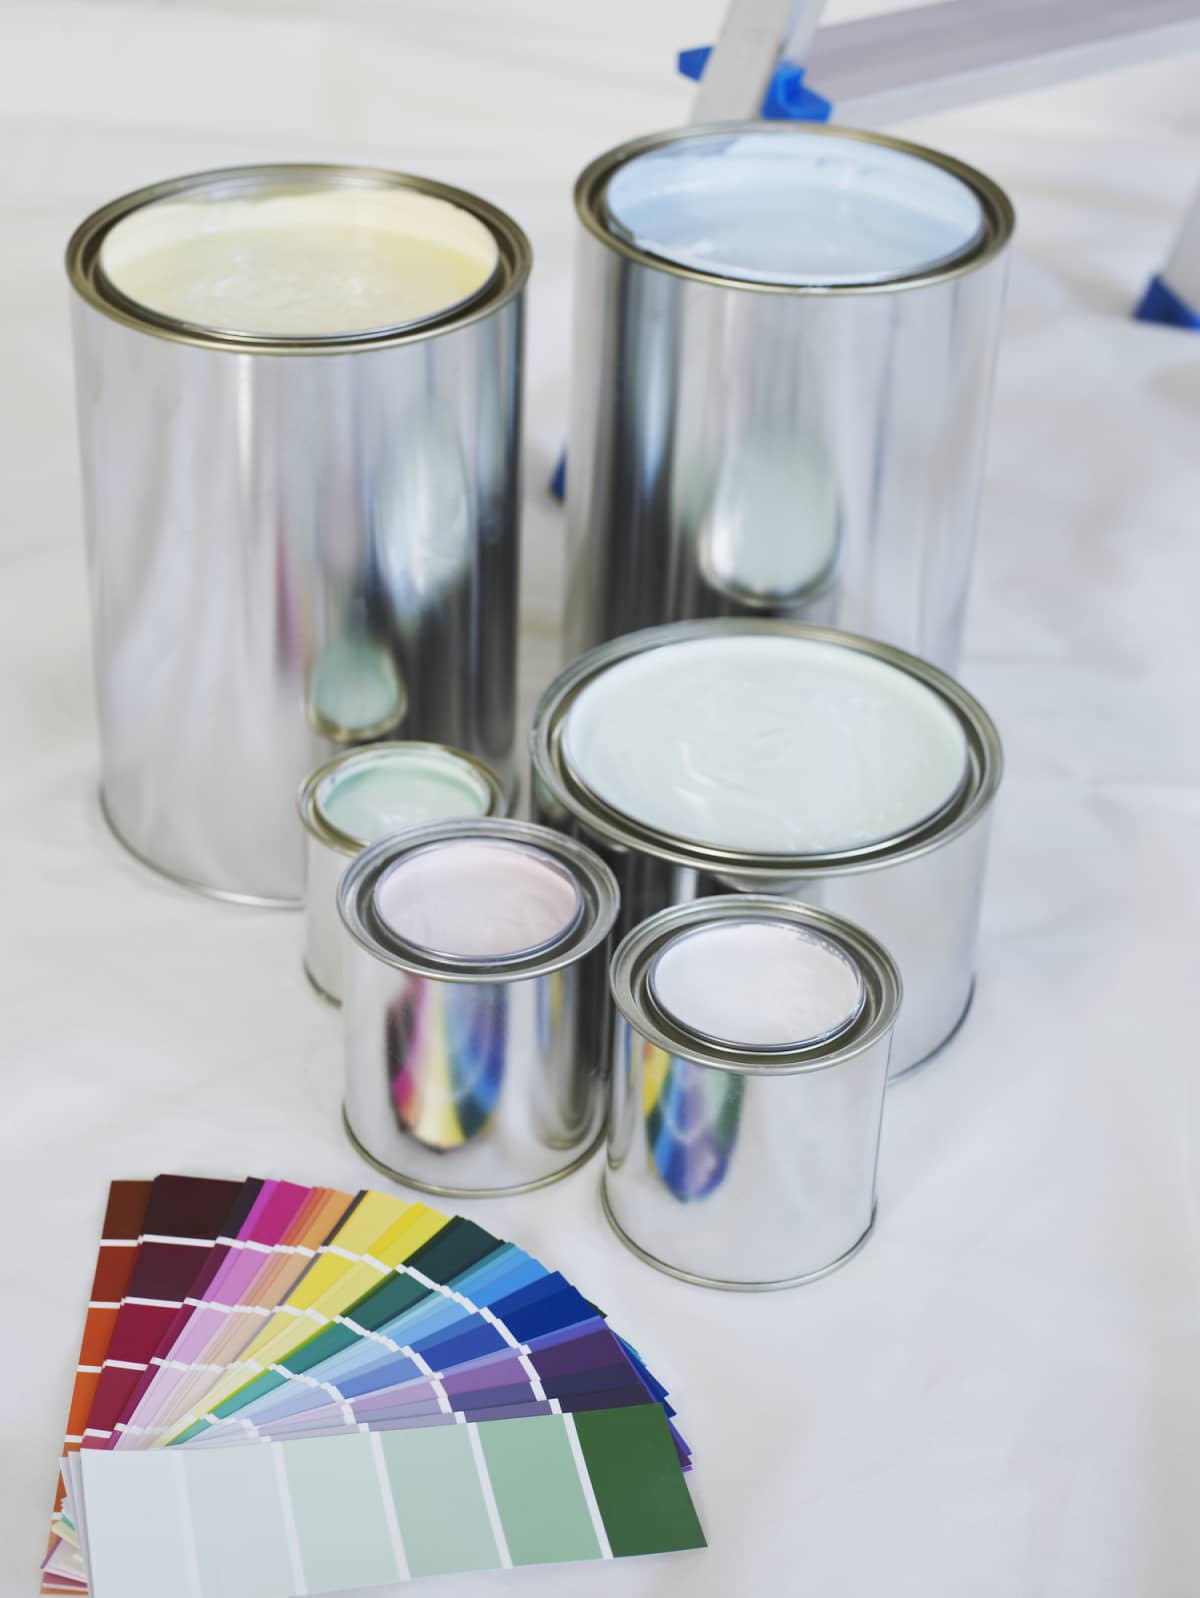 Paint cans and color samples on a white background